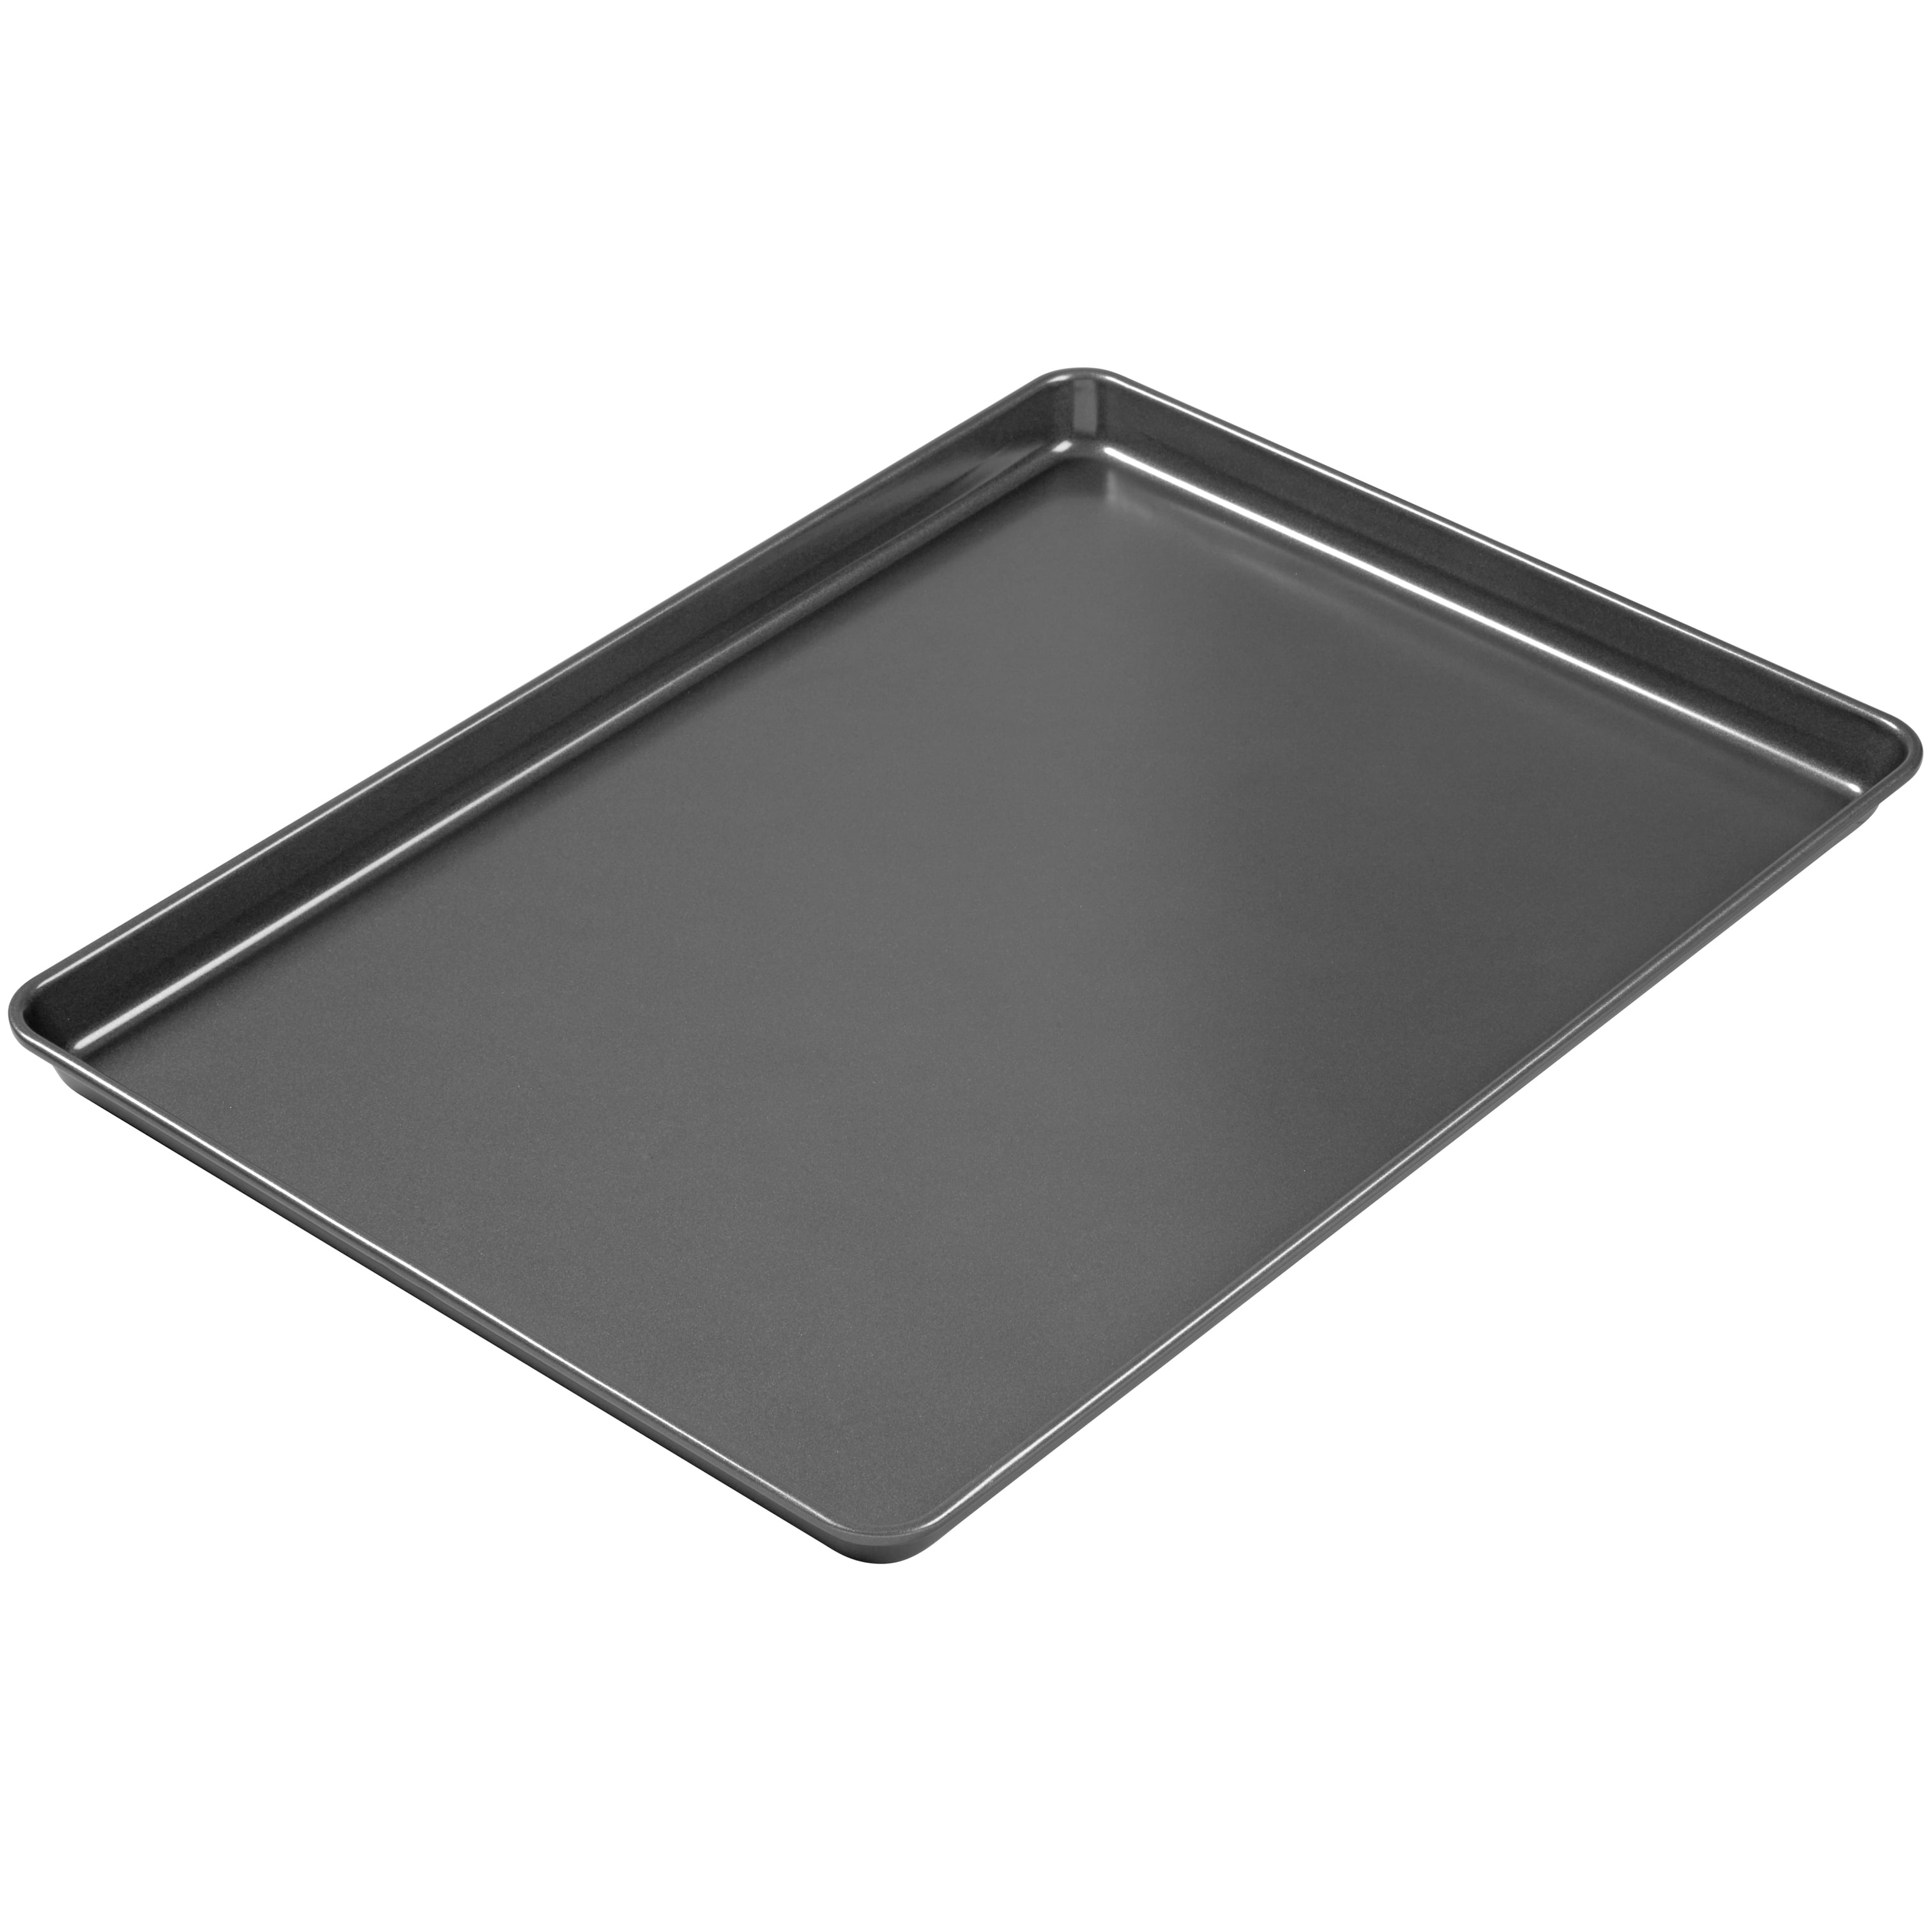 Wilton Perfect Results Cookie Pan, Large